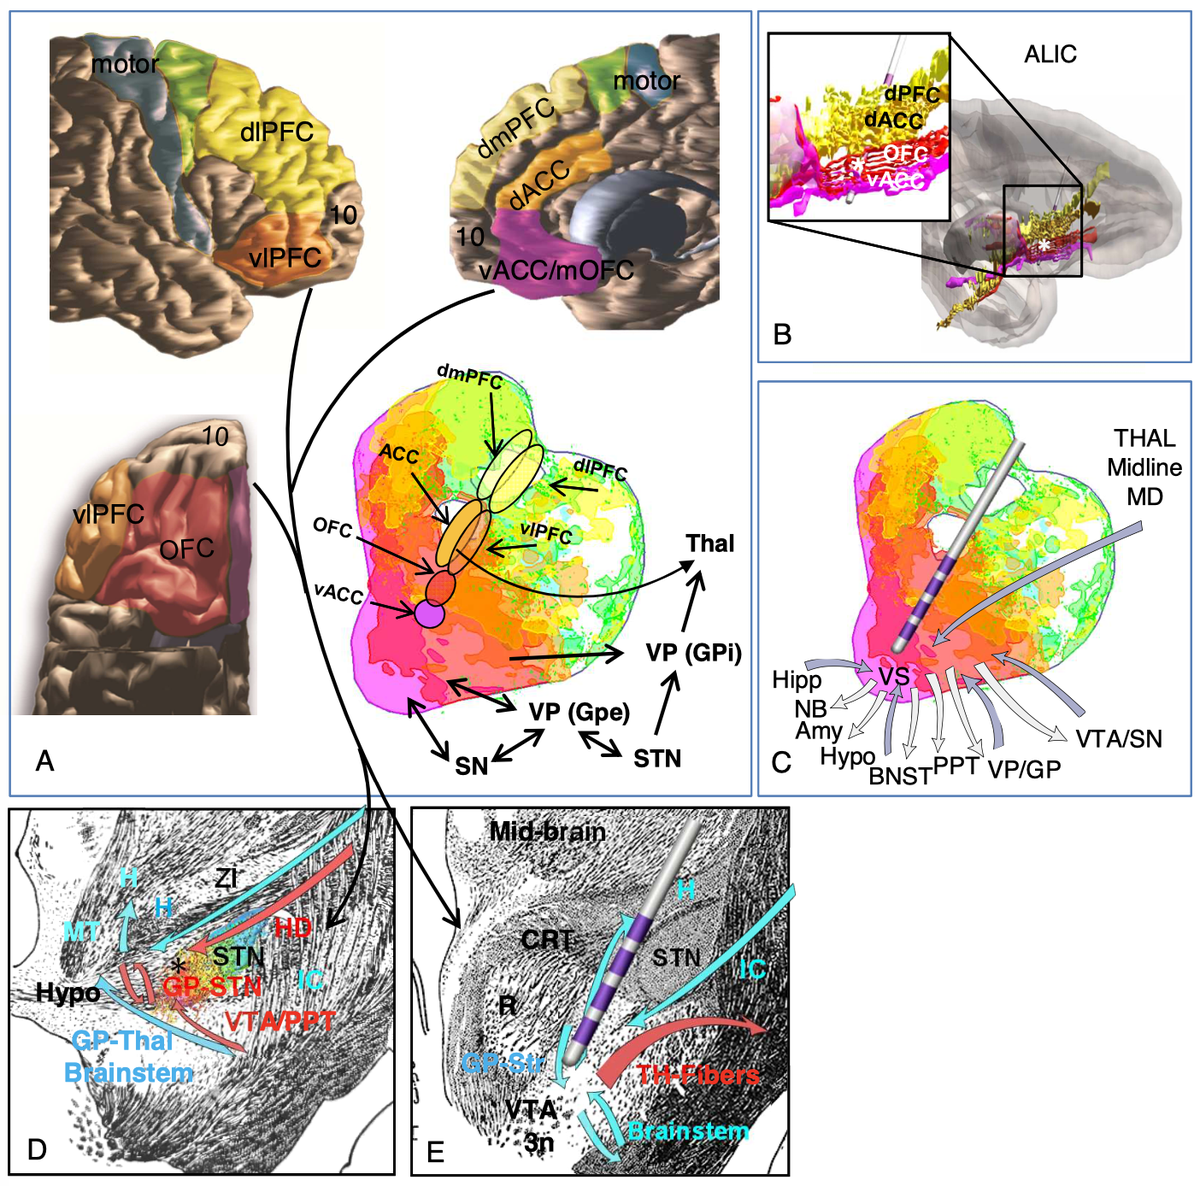 Taking the excellent article by Suzanne Haber, @yendikiand  @SaadJbabdi in BioPsych as an opportunity for a thread:“The dMRI tractography streamlines labeled as the slMFB represent fibers of the Internal Capsule, not the MFB.” I could not agree more. https://www.biologicalpsychiatryjournal.com/article/S0006-3223(20)31773-X/fulltext